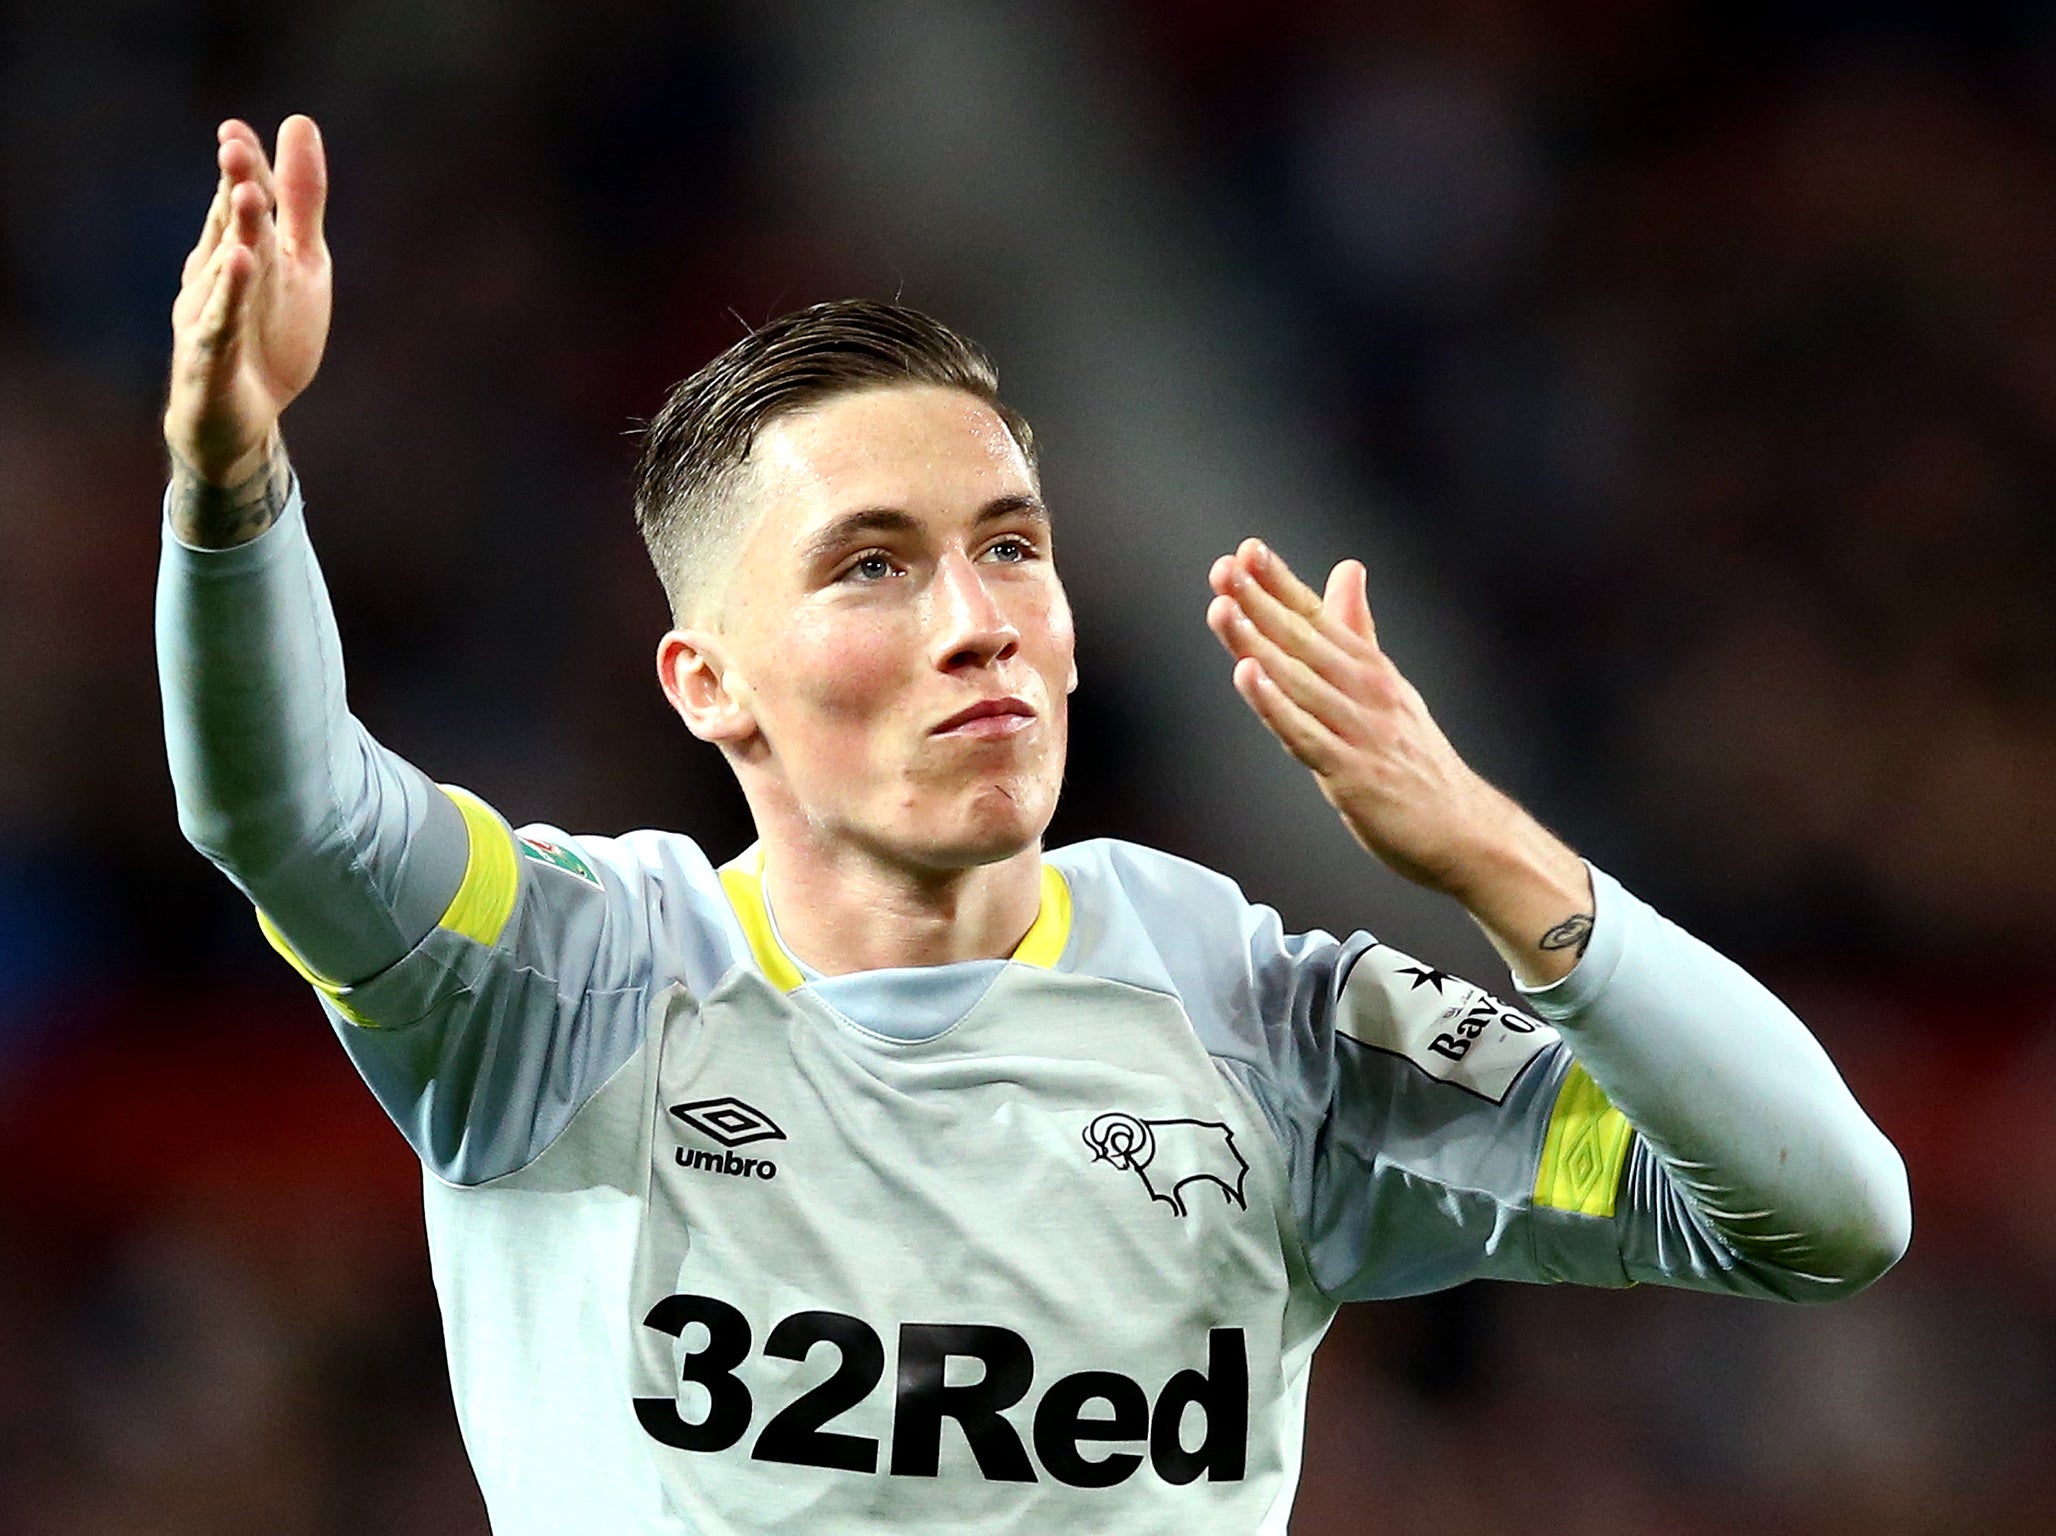 Harry Wilson will be one to watch